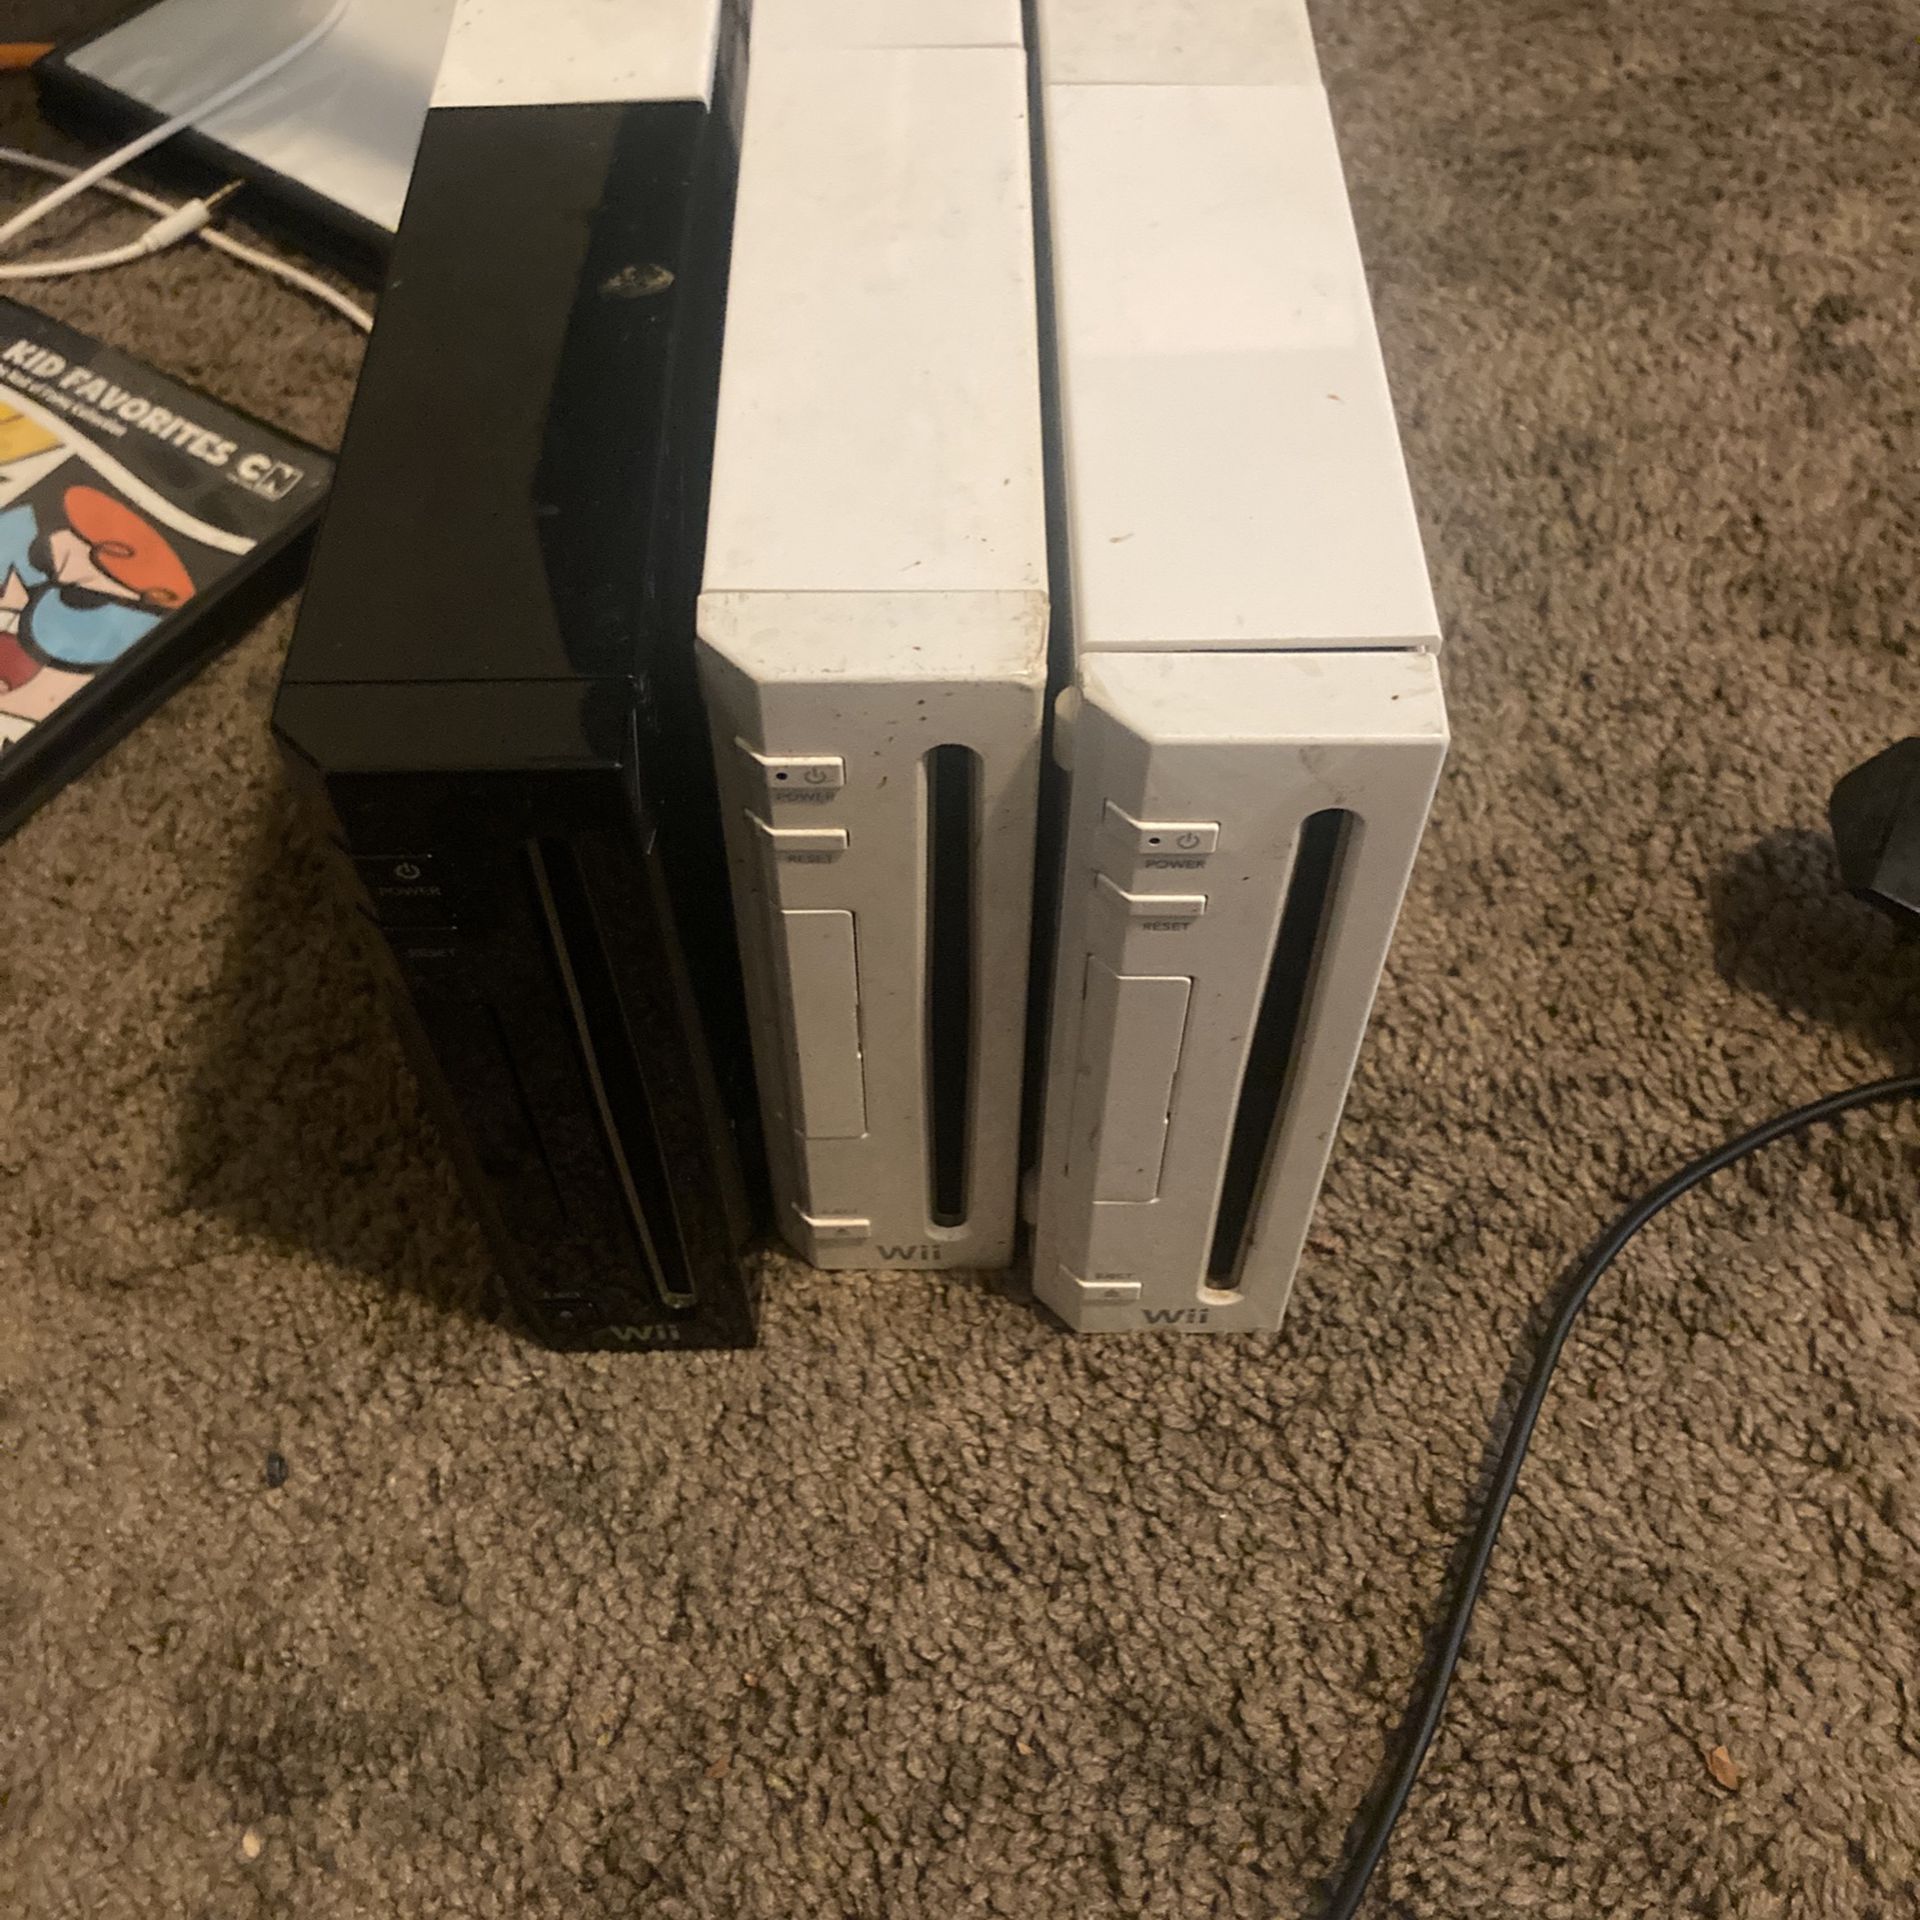 Nintendo Wii’s for sale